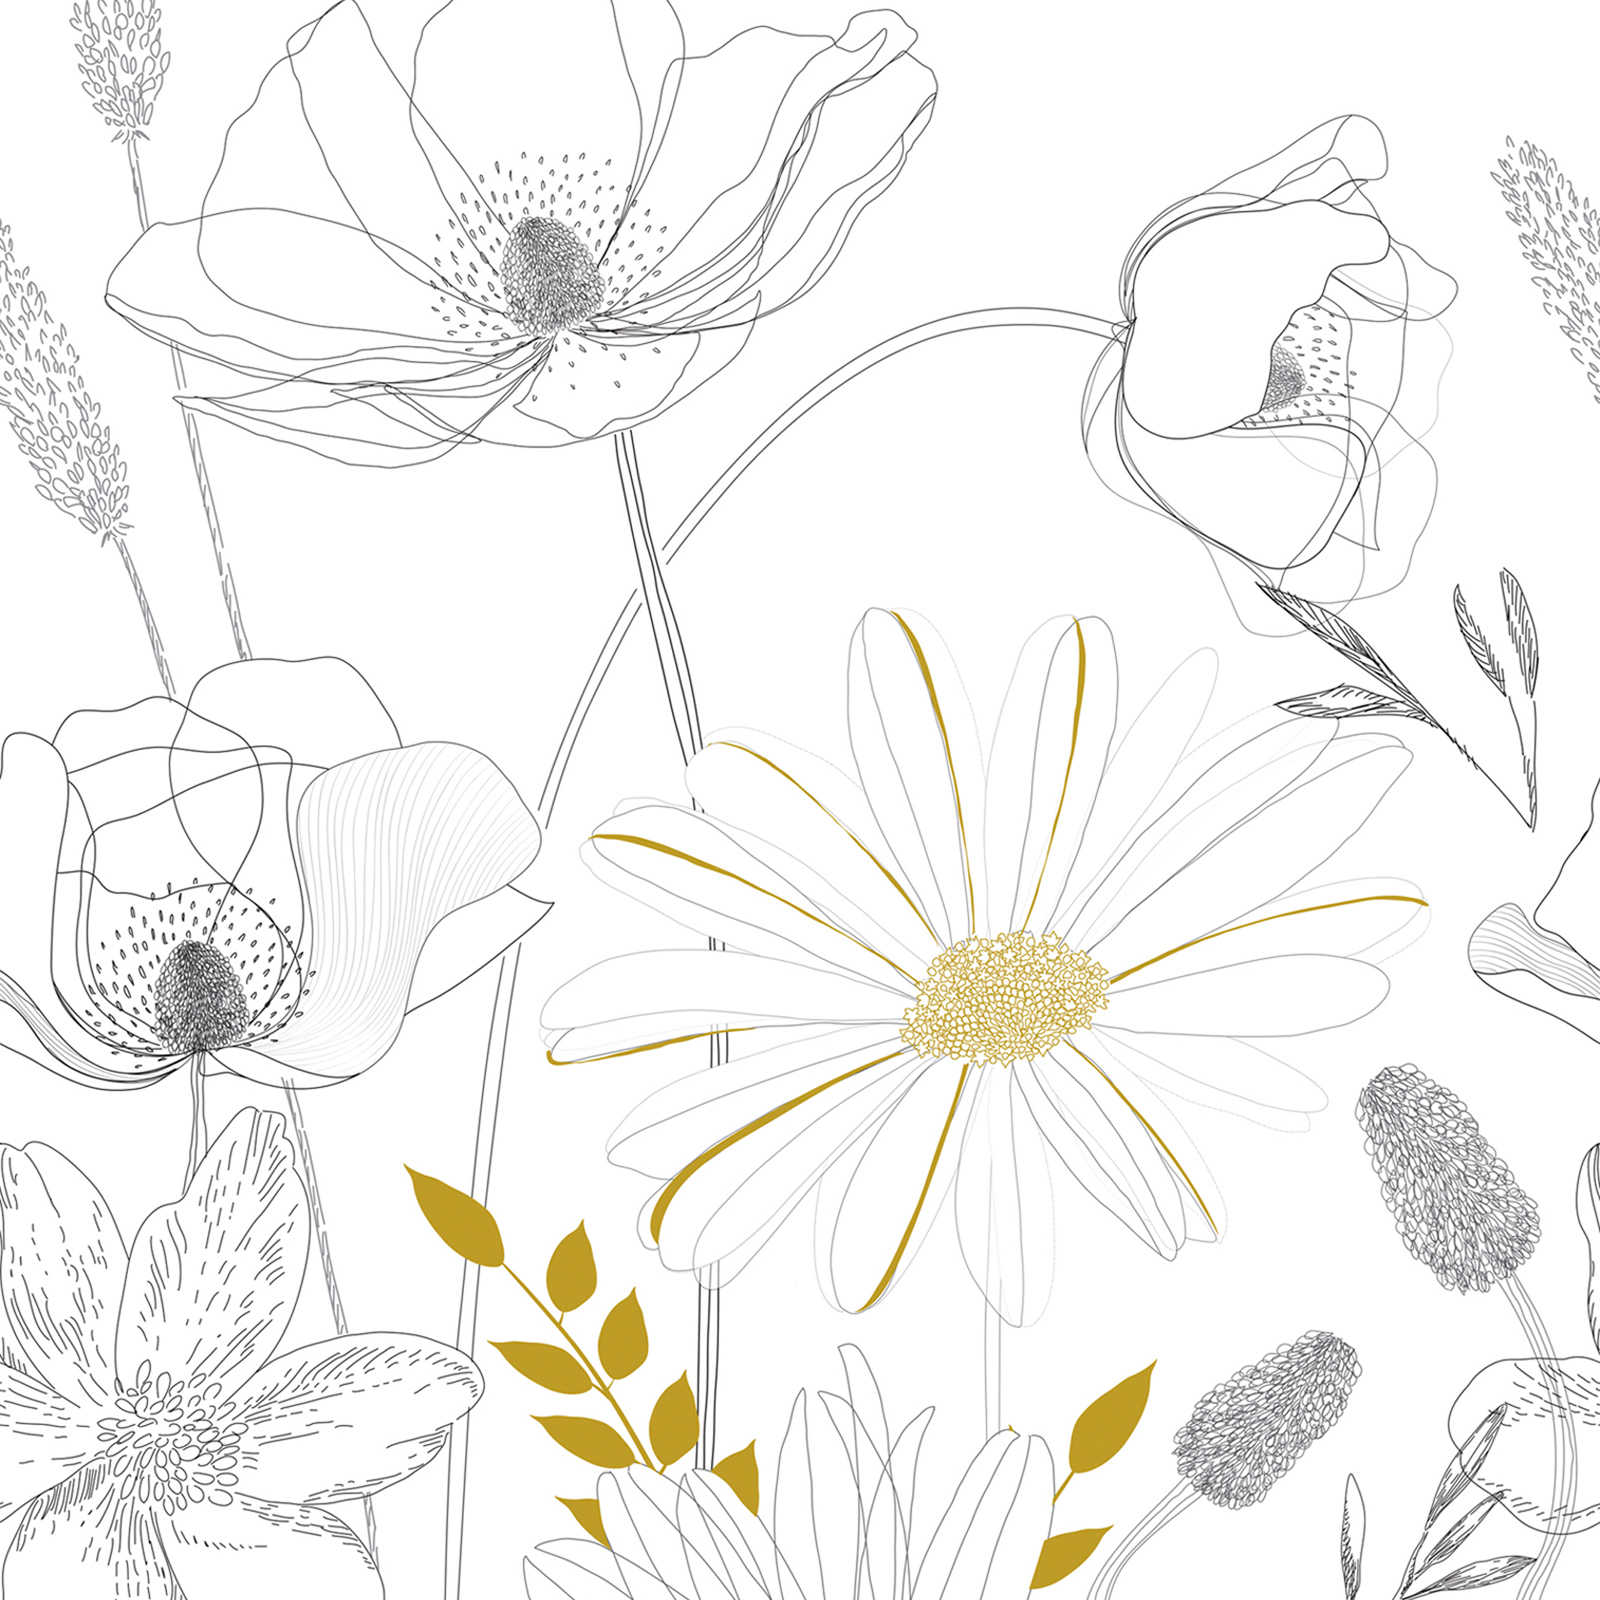 Drawn Floral Motif Wallpaper with Colour Accents - White, Black, Yellow
